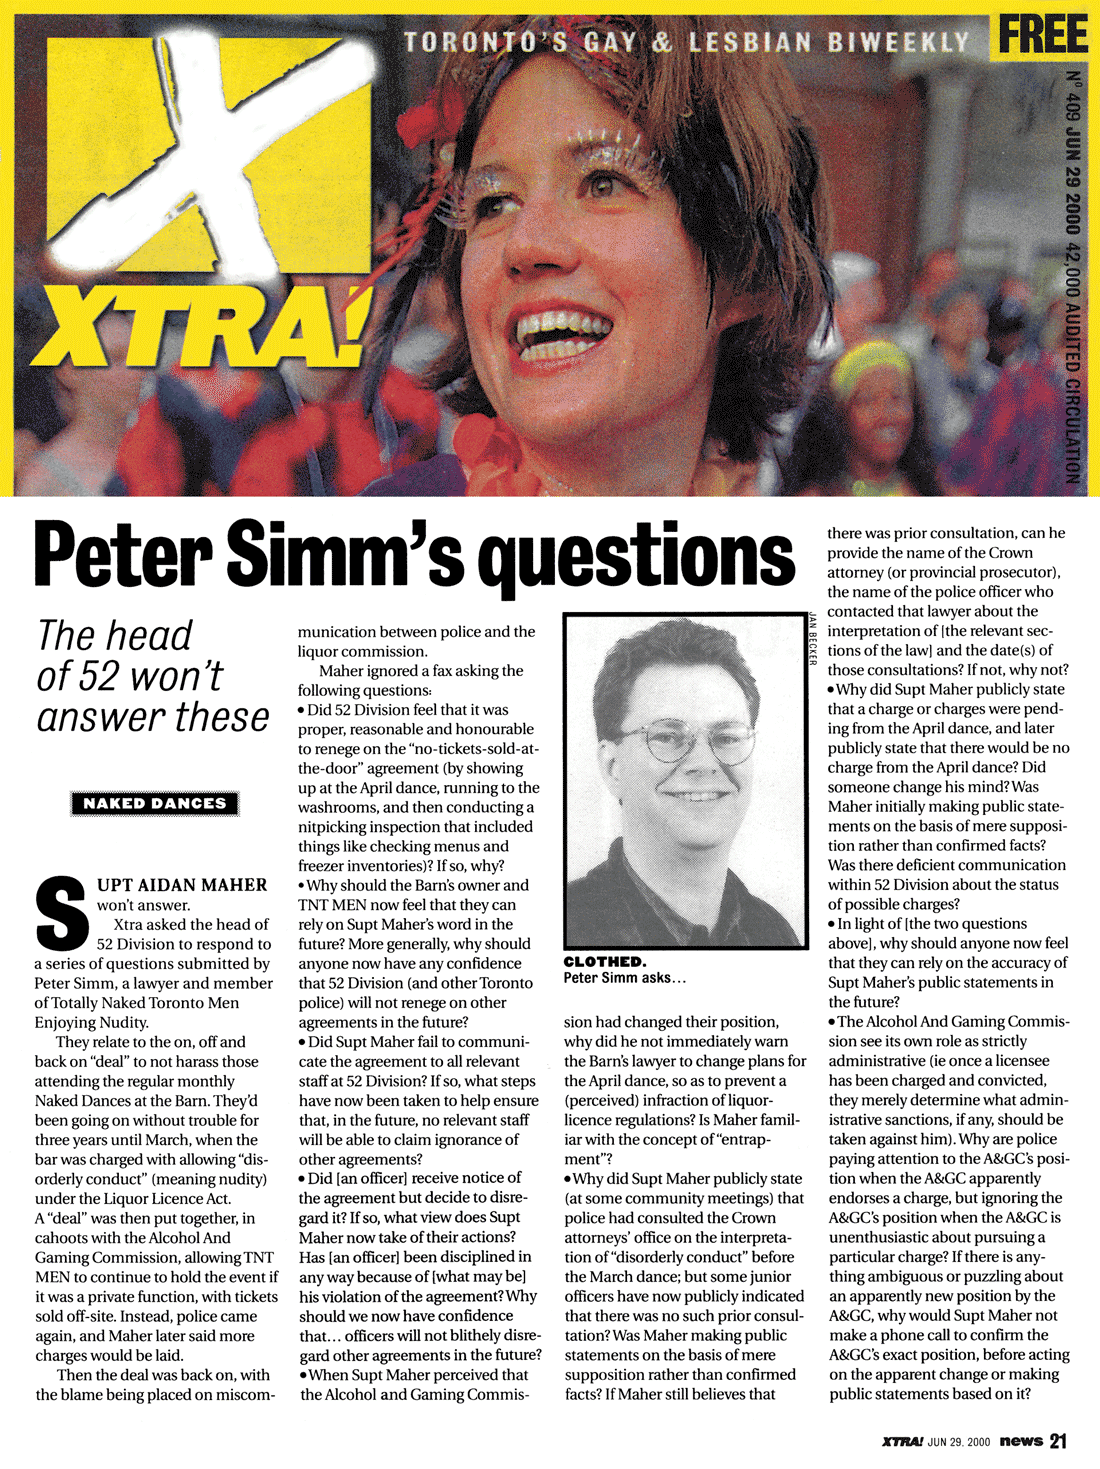 Xtra [Toronto] 2000-06-29 p.21 - Simm’s questions for police re The Barn